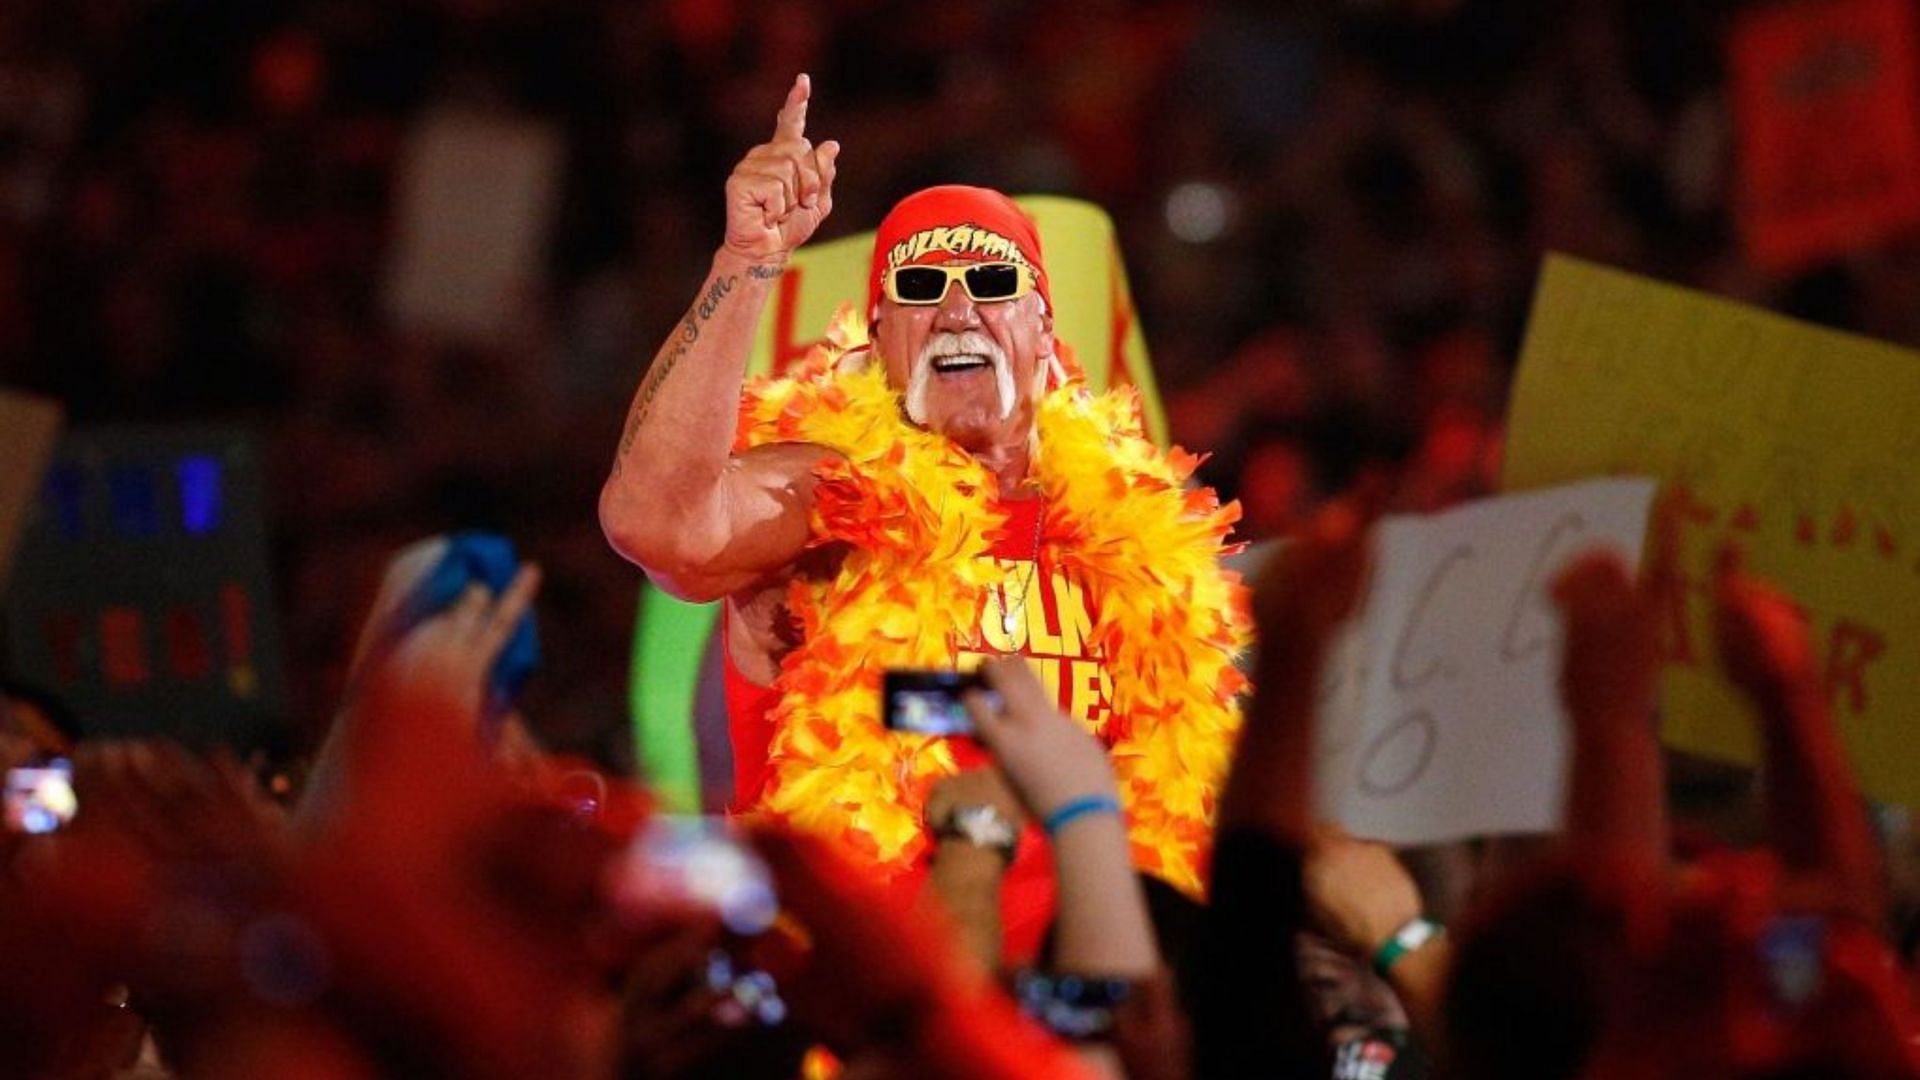 WWE Hall of Famer Hulk Hogan will reportedly be at RAW XXX